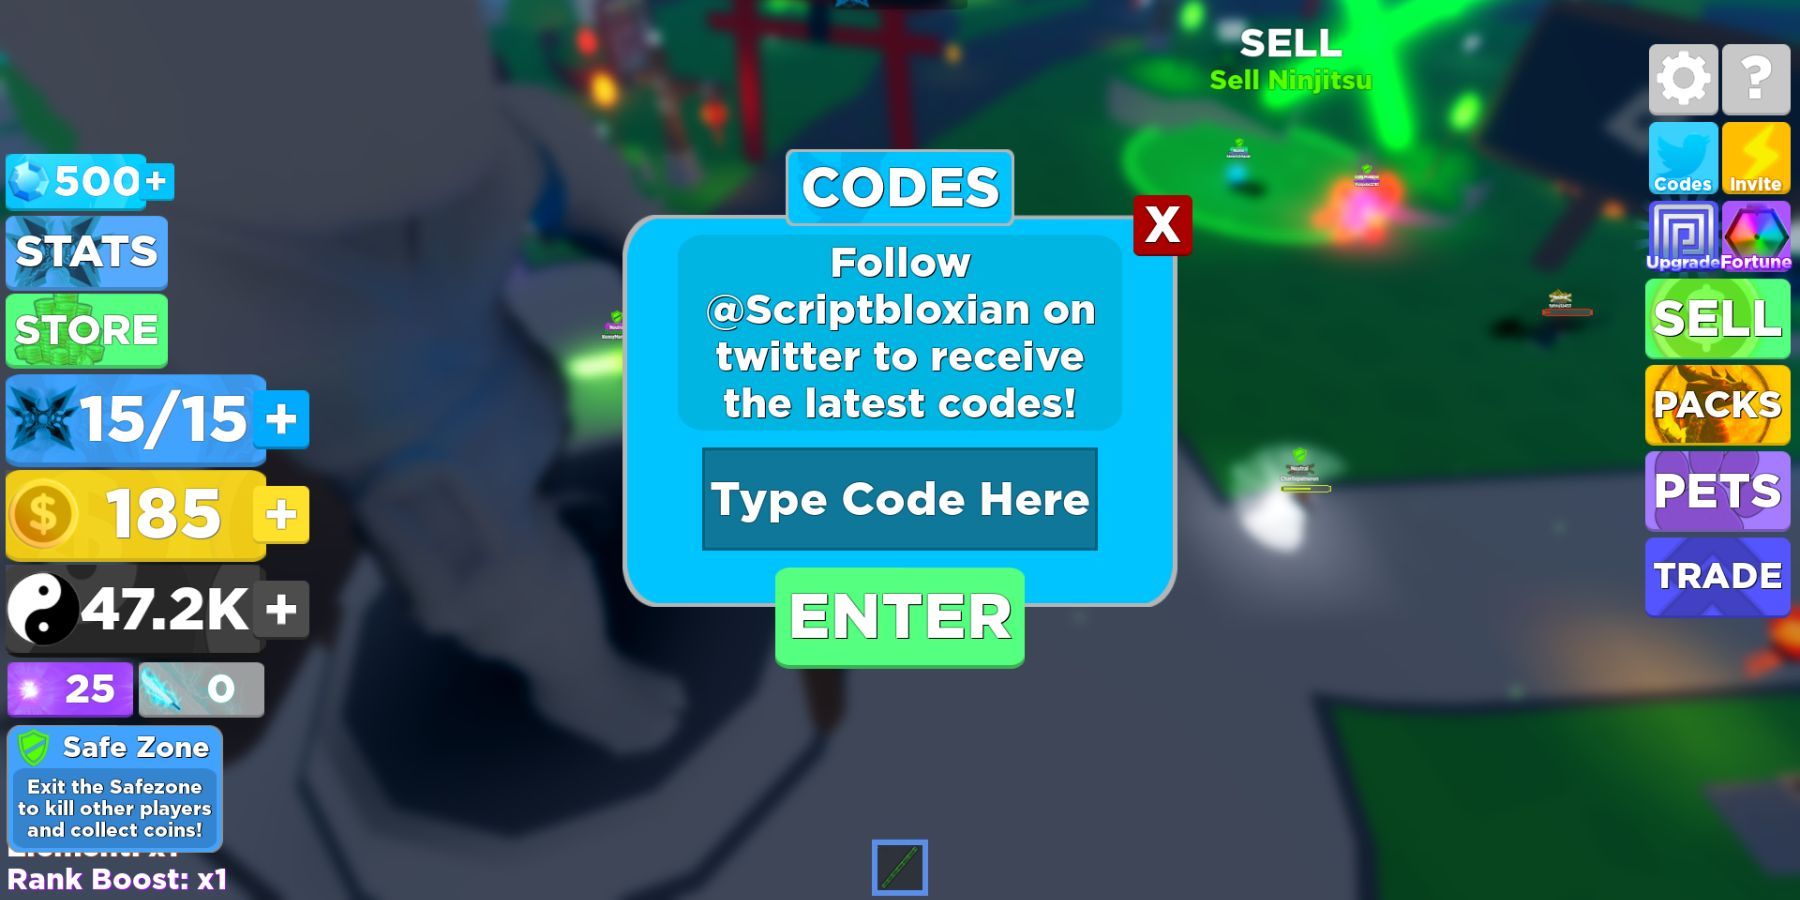 Roblox Ninja Legends 2 Codes (March ) - New Release! - Pro Game Guides